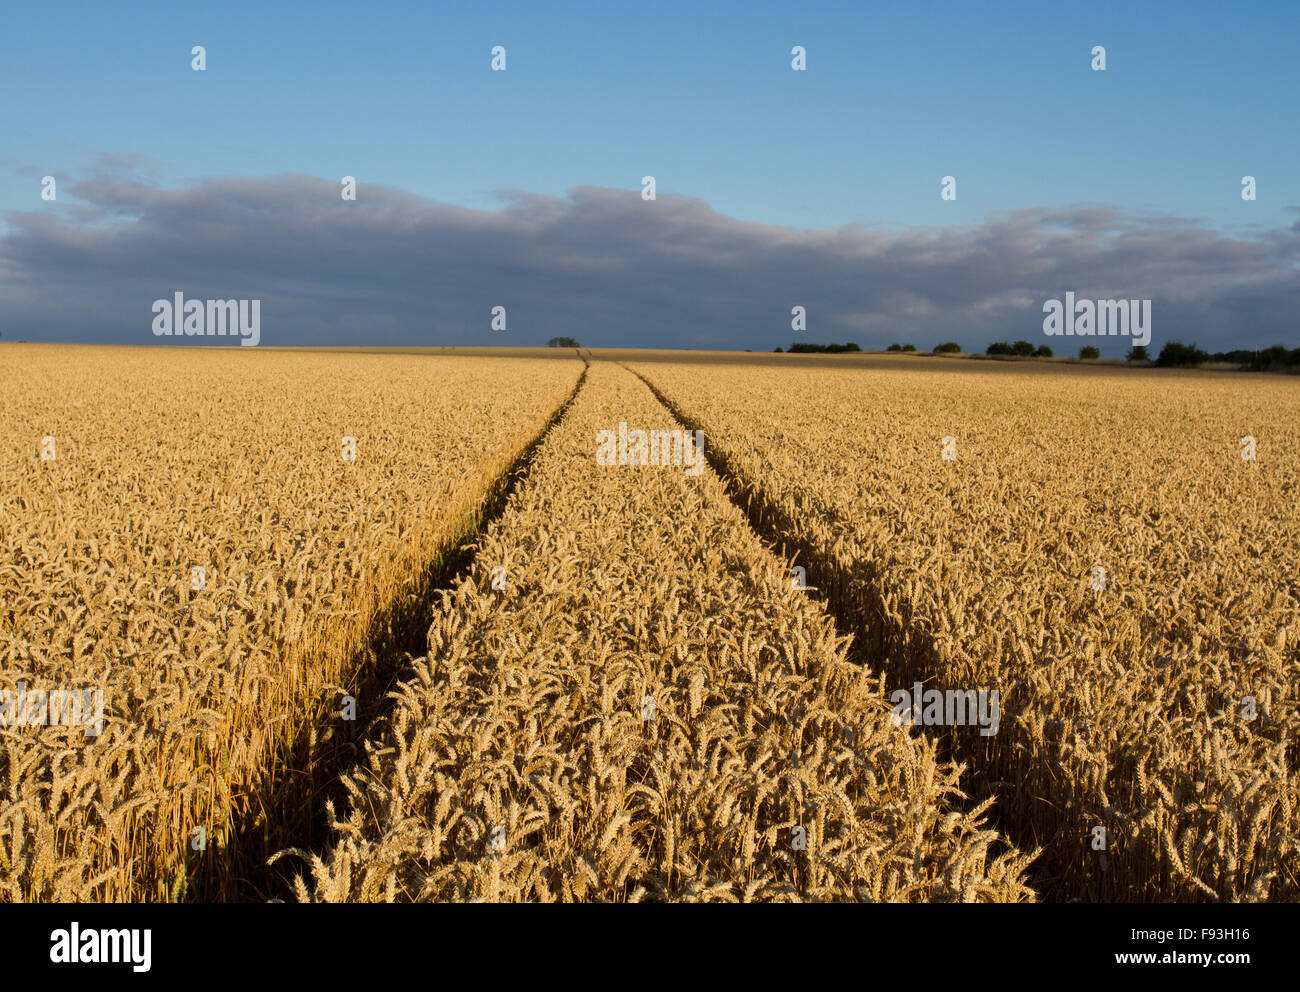 Tractor tracks disappearing into the distance of a golden wheat field at sunset. Stock Photo